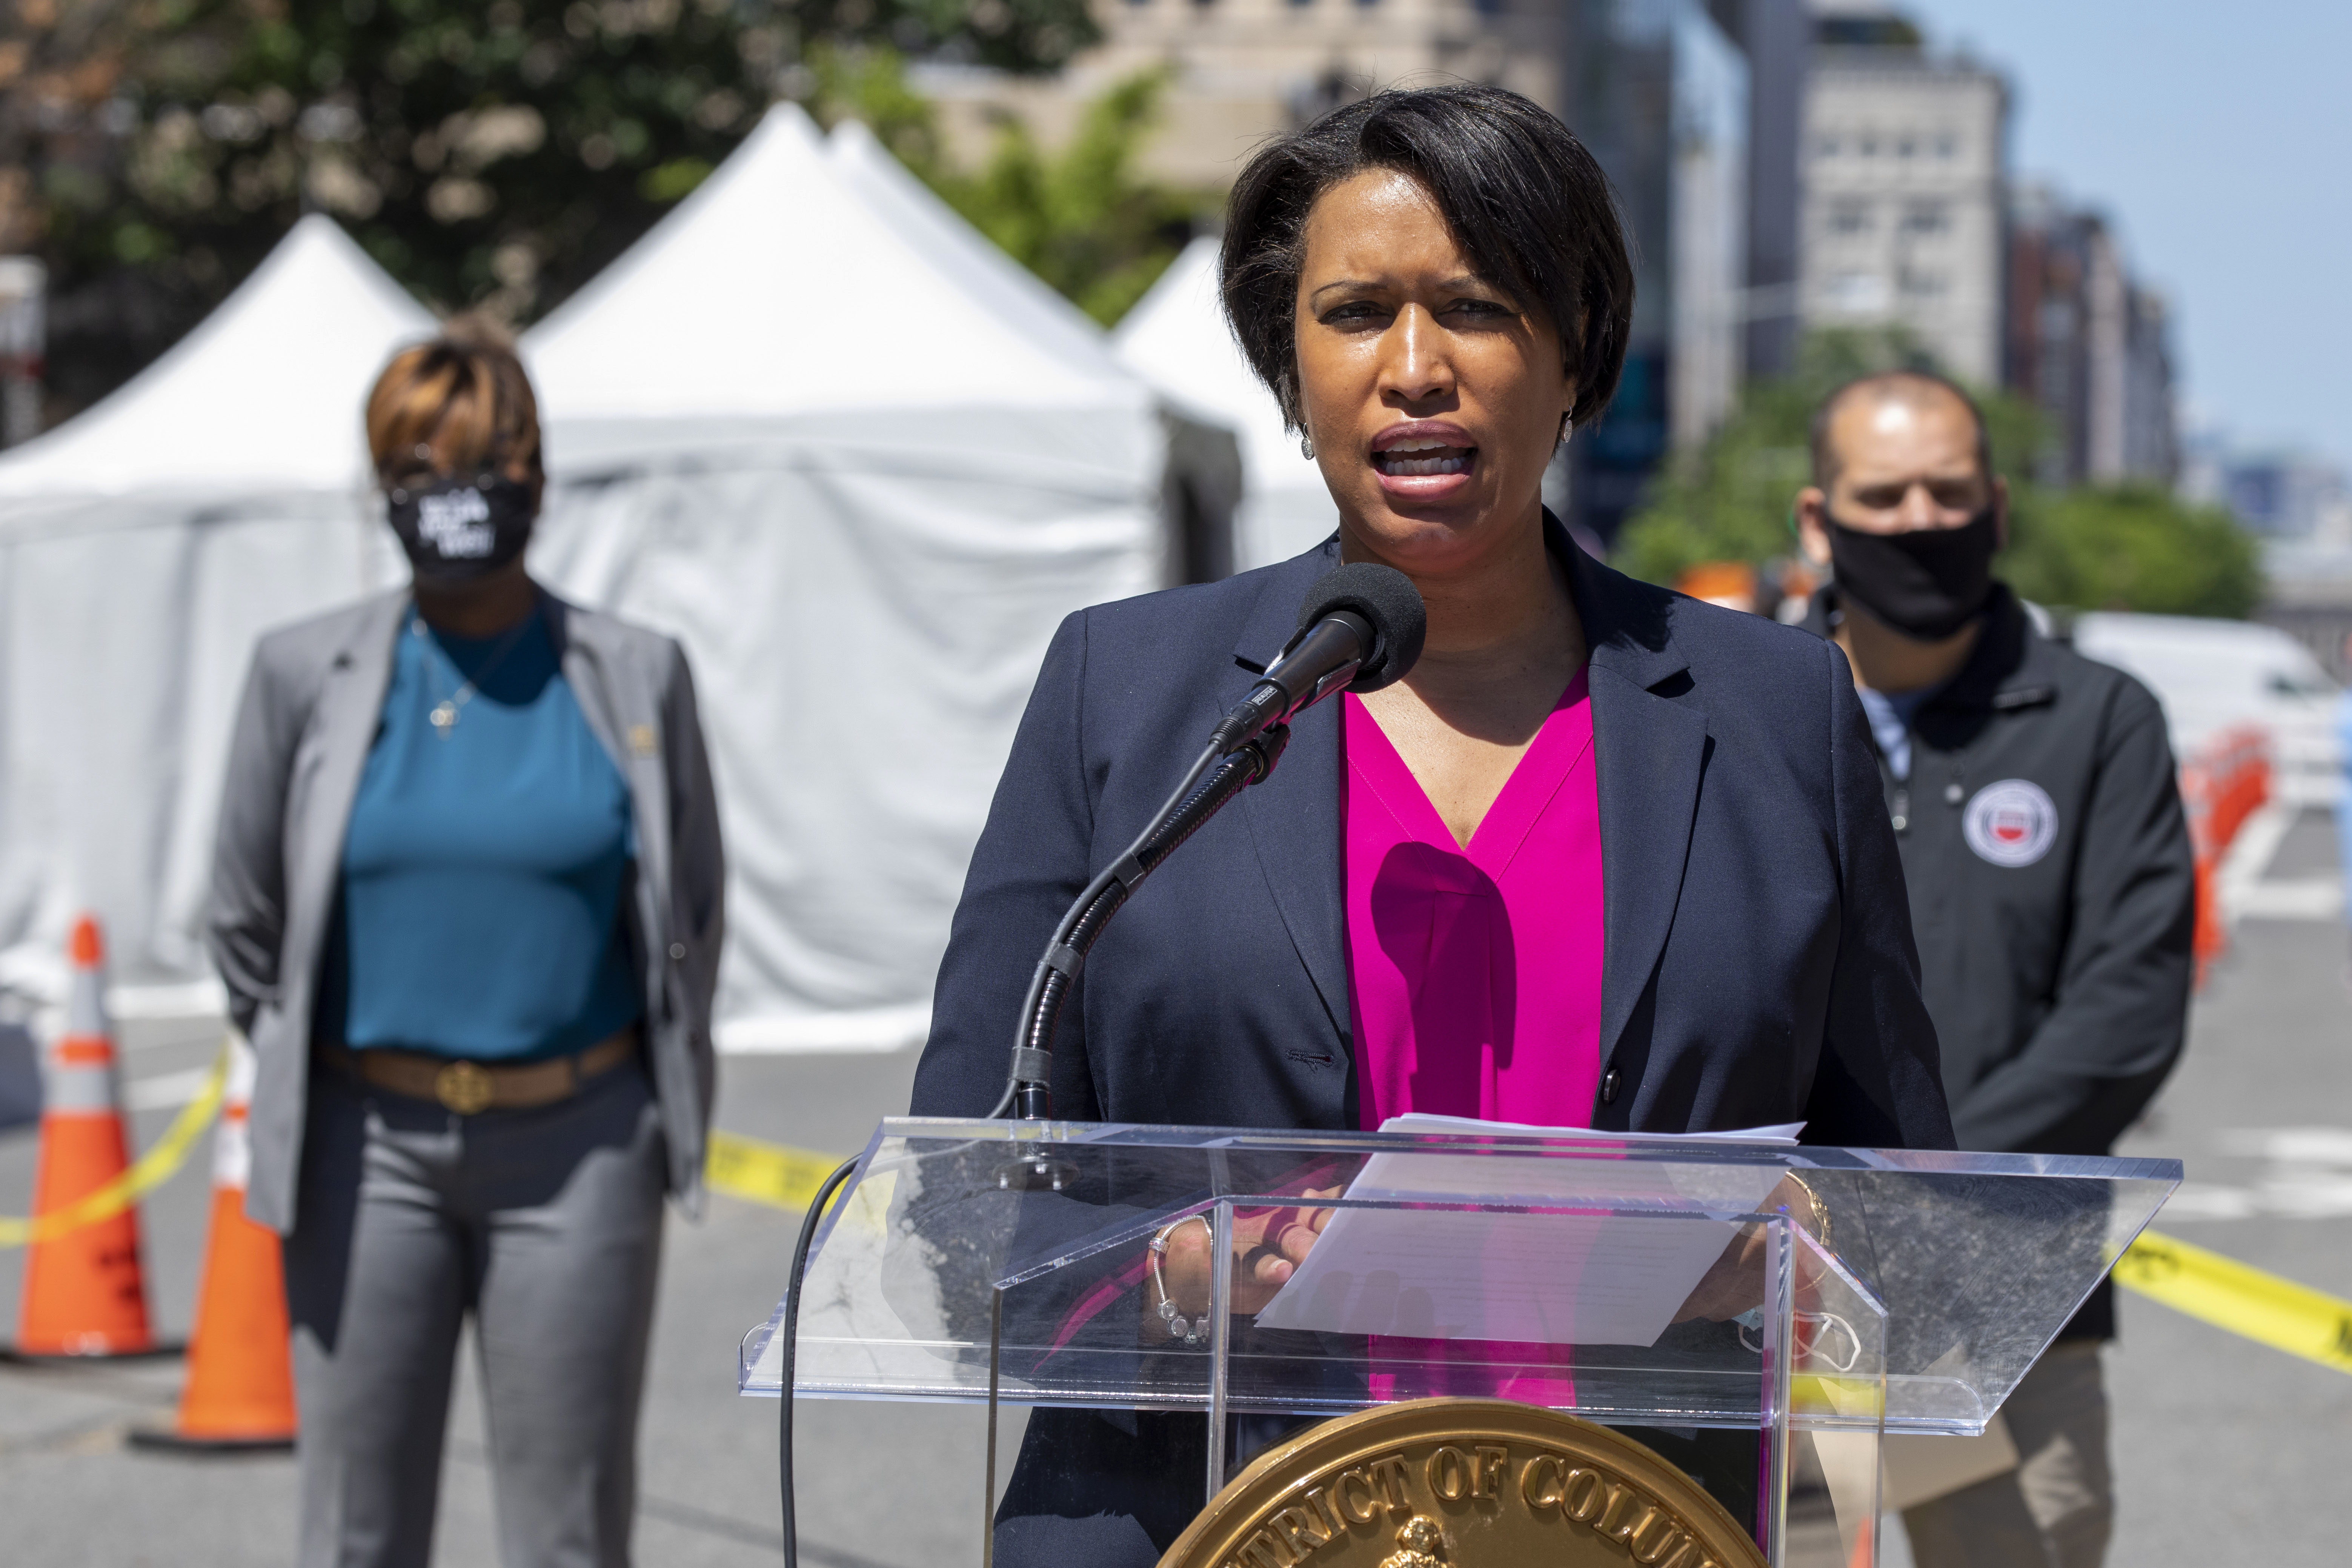 DC Mayor Muriel Bowser speaks during a news conference in Washington on June 1.